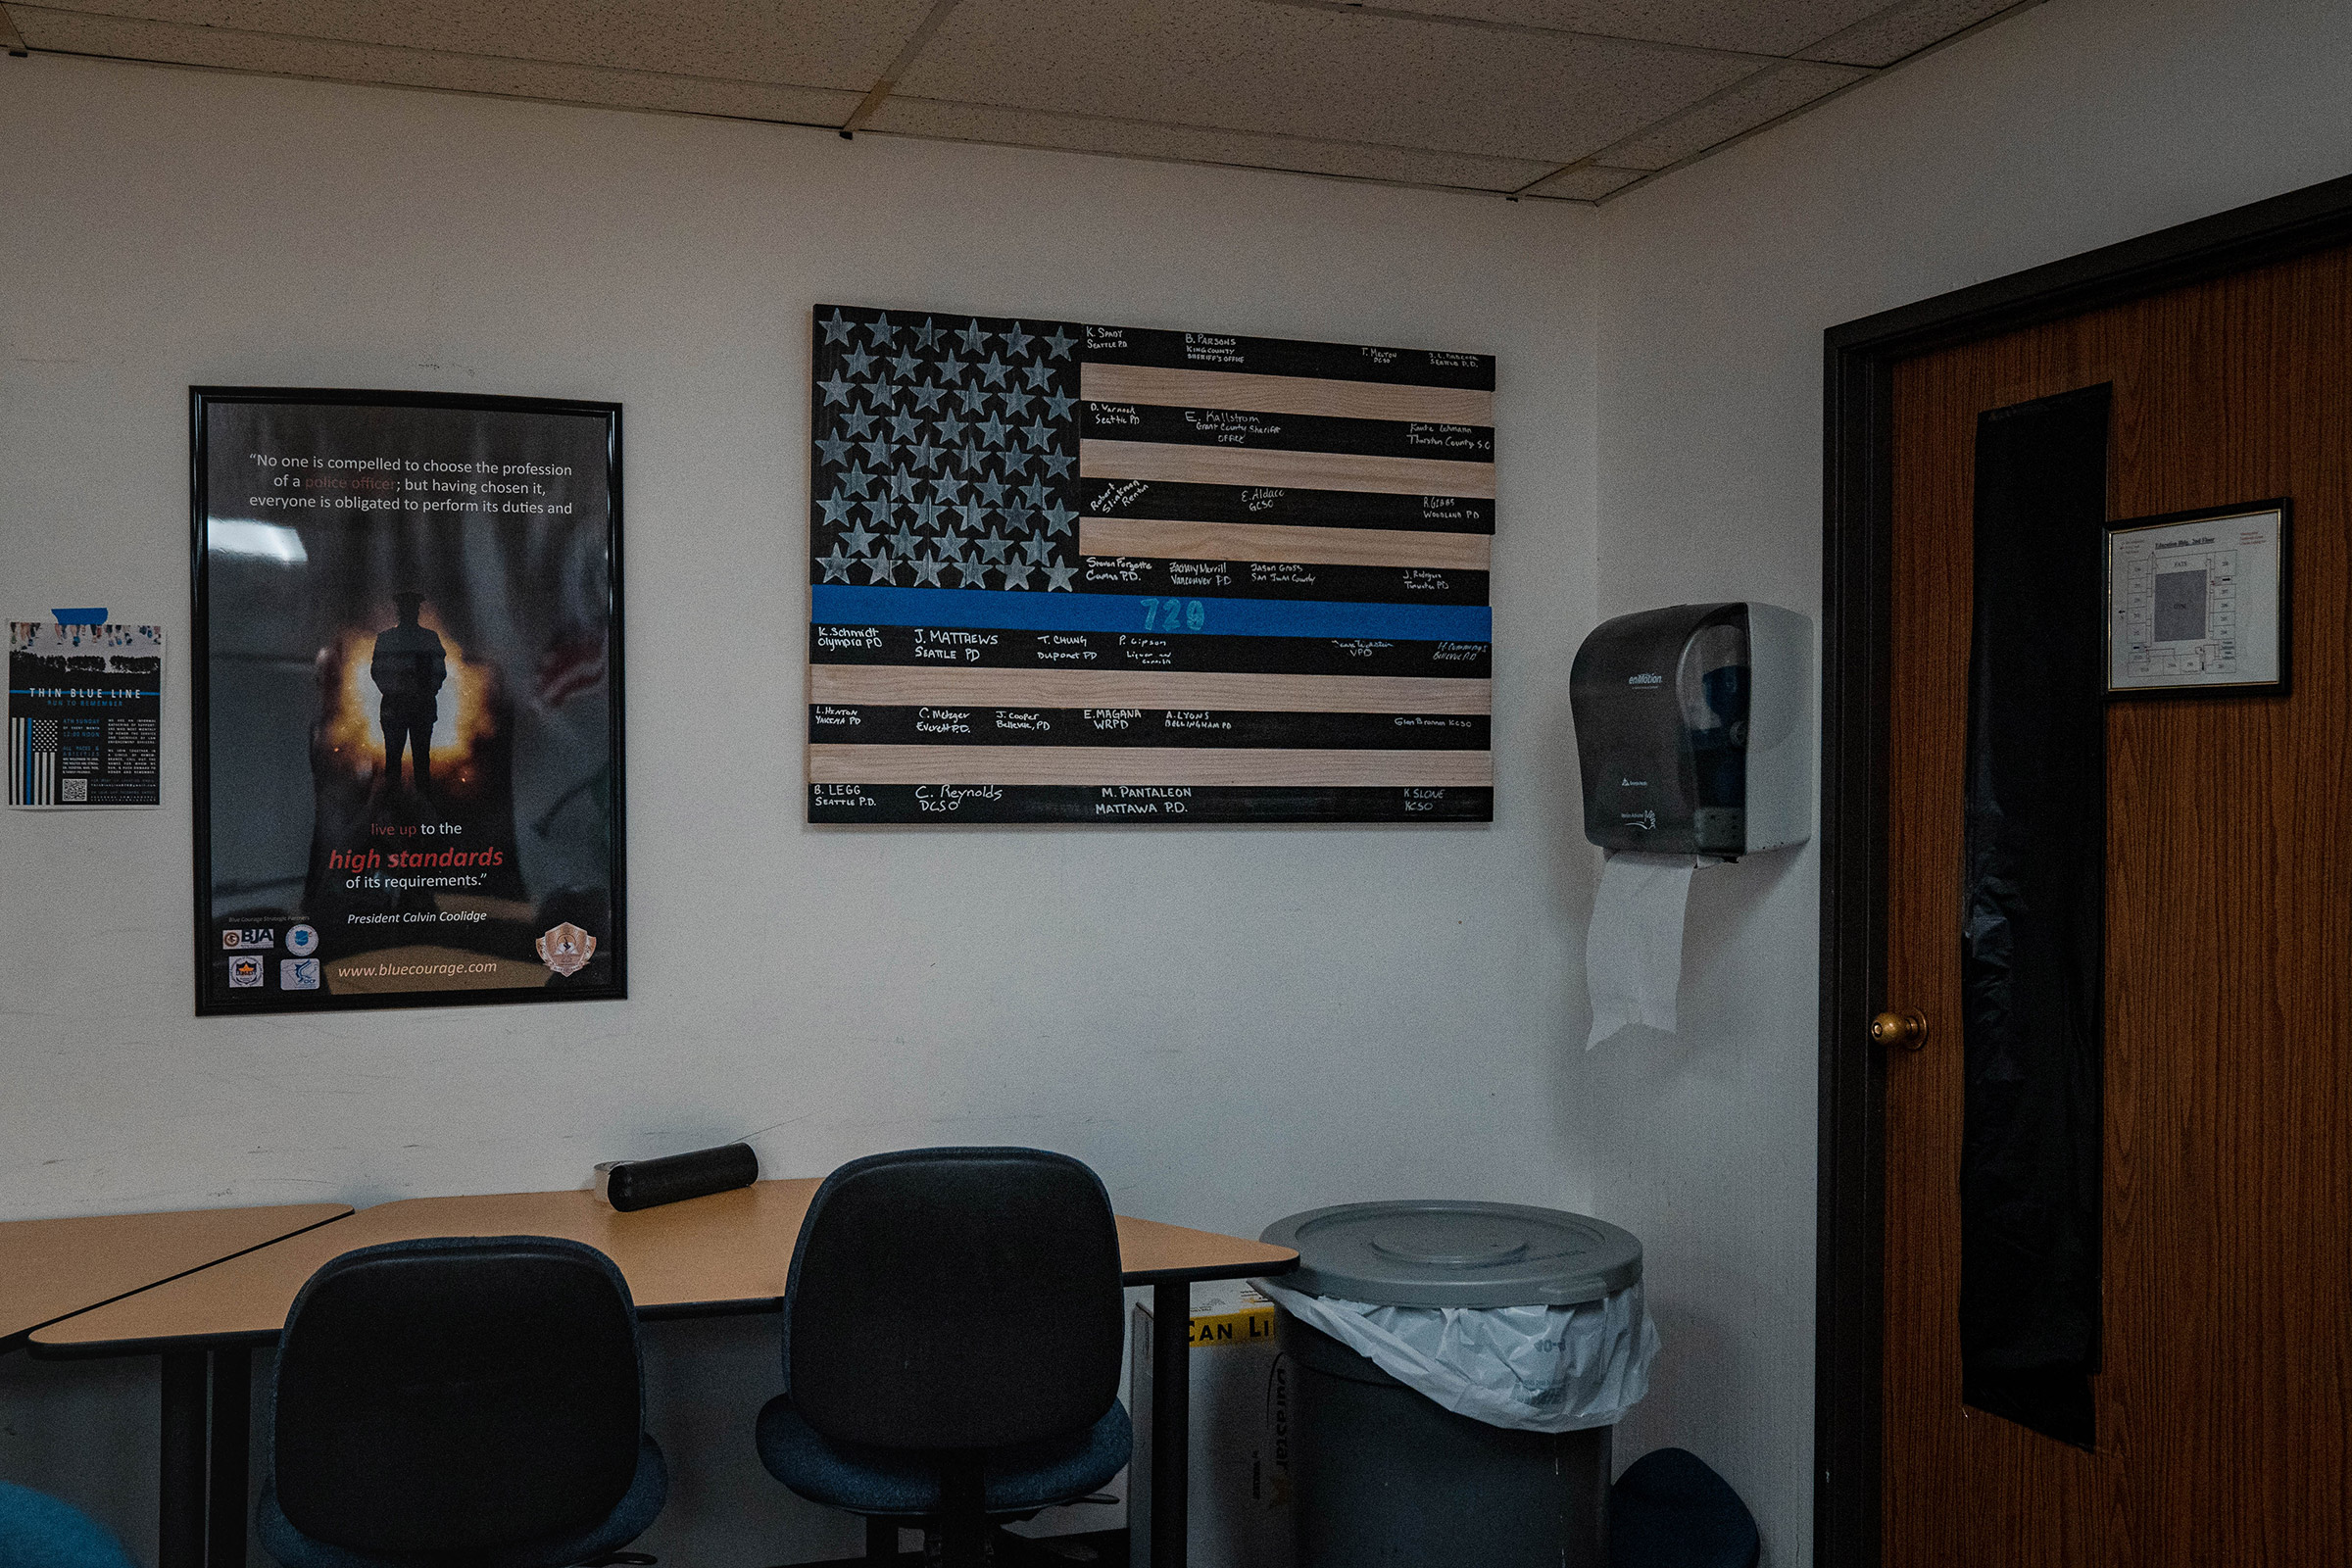 A flag on display in an out-of-use classroom.